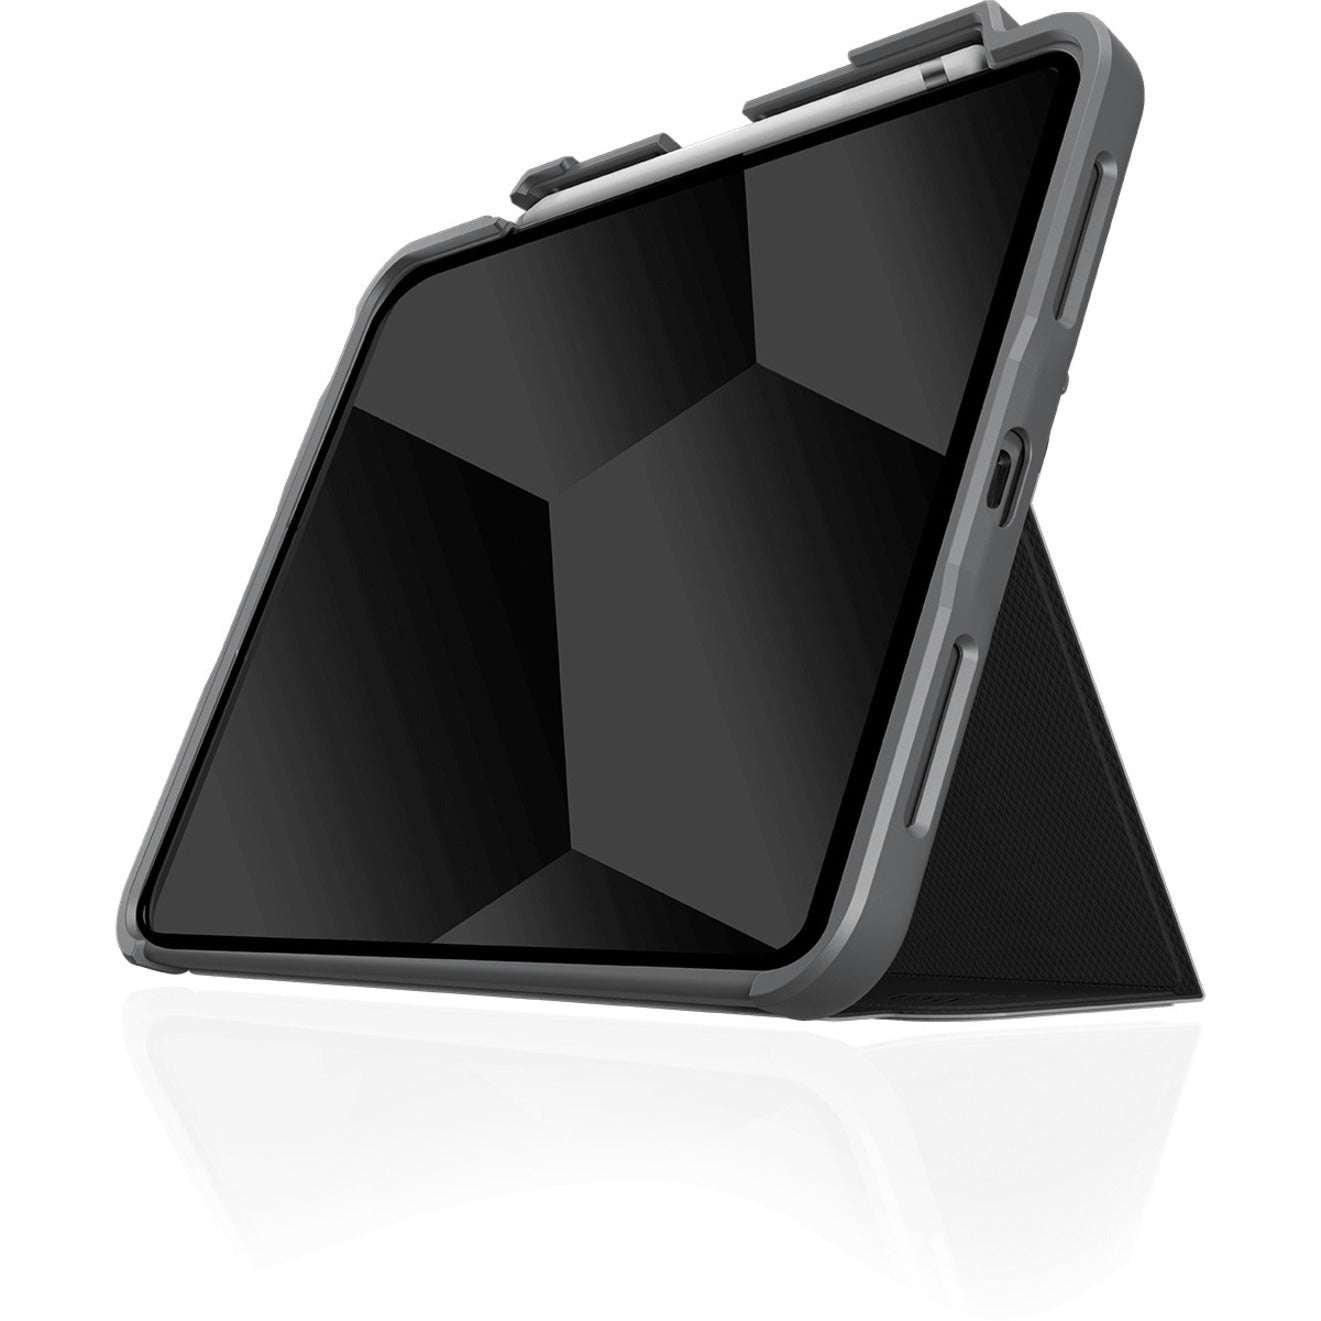 STM Goods STM-222-387KX-01 Dux Plus for iPad (10th Generation), Magnetic Closure, Rugged, Drop and Bump Resistant, Black